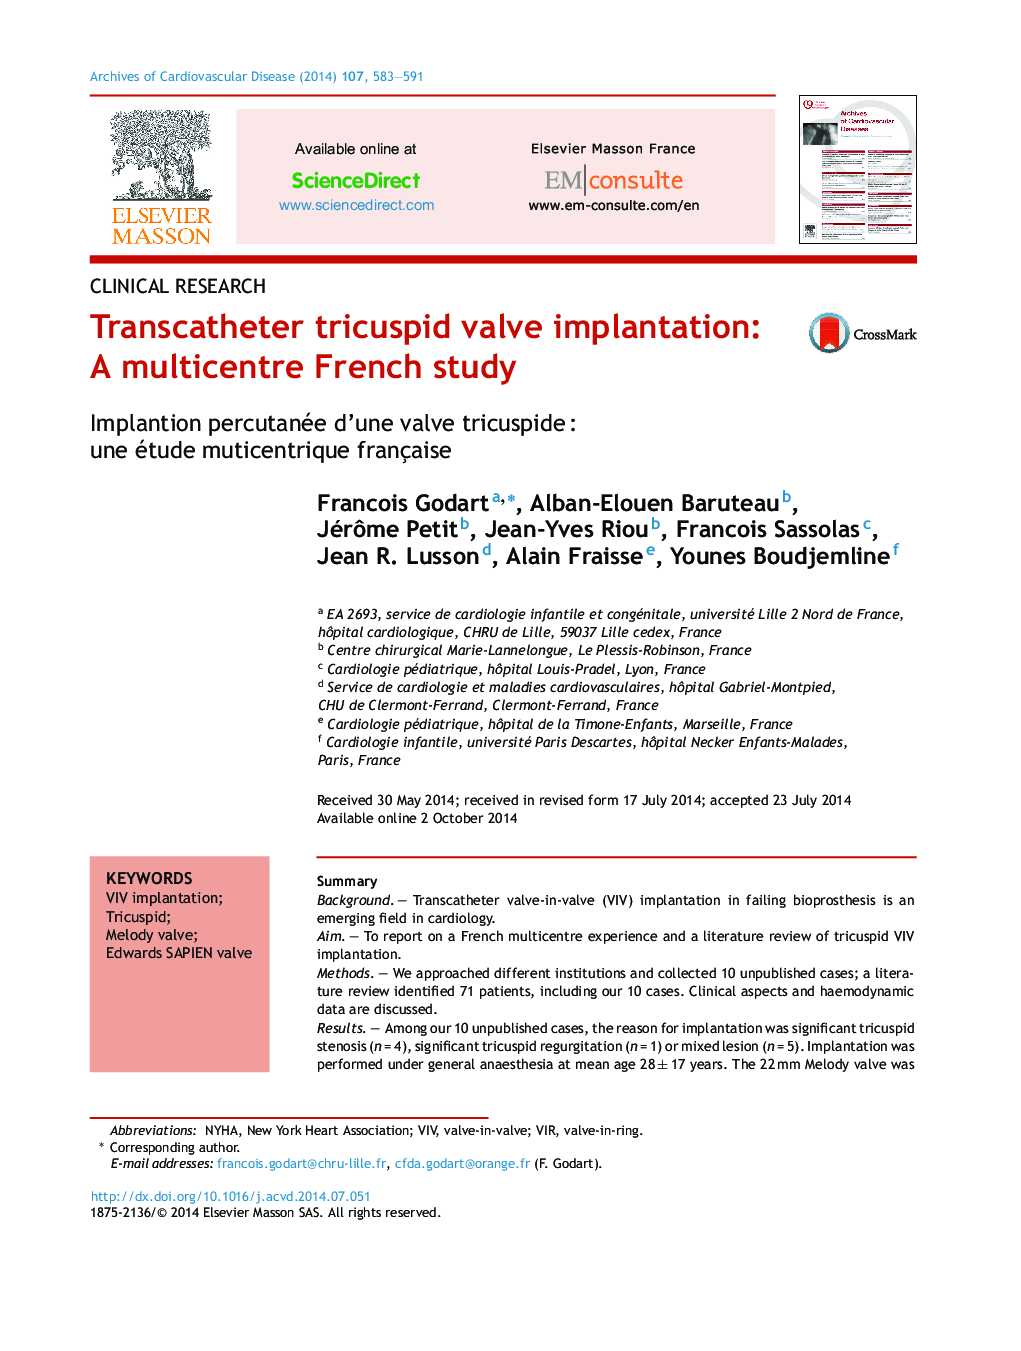 Transcatheter tricuspid valve implantation: A multicentre French study